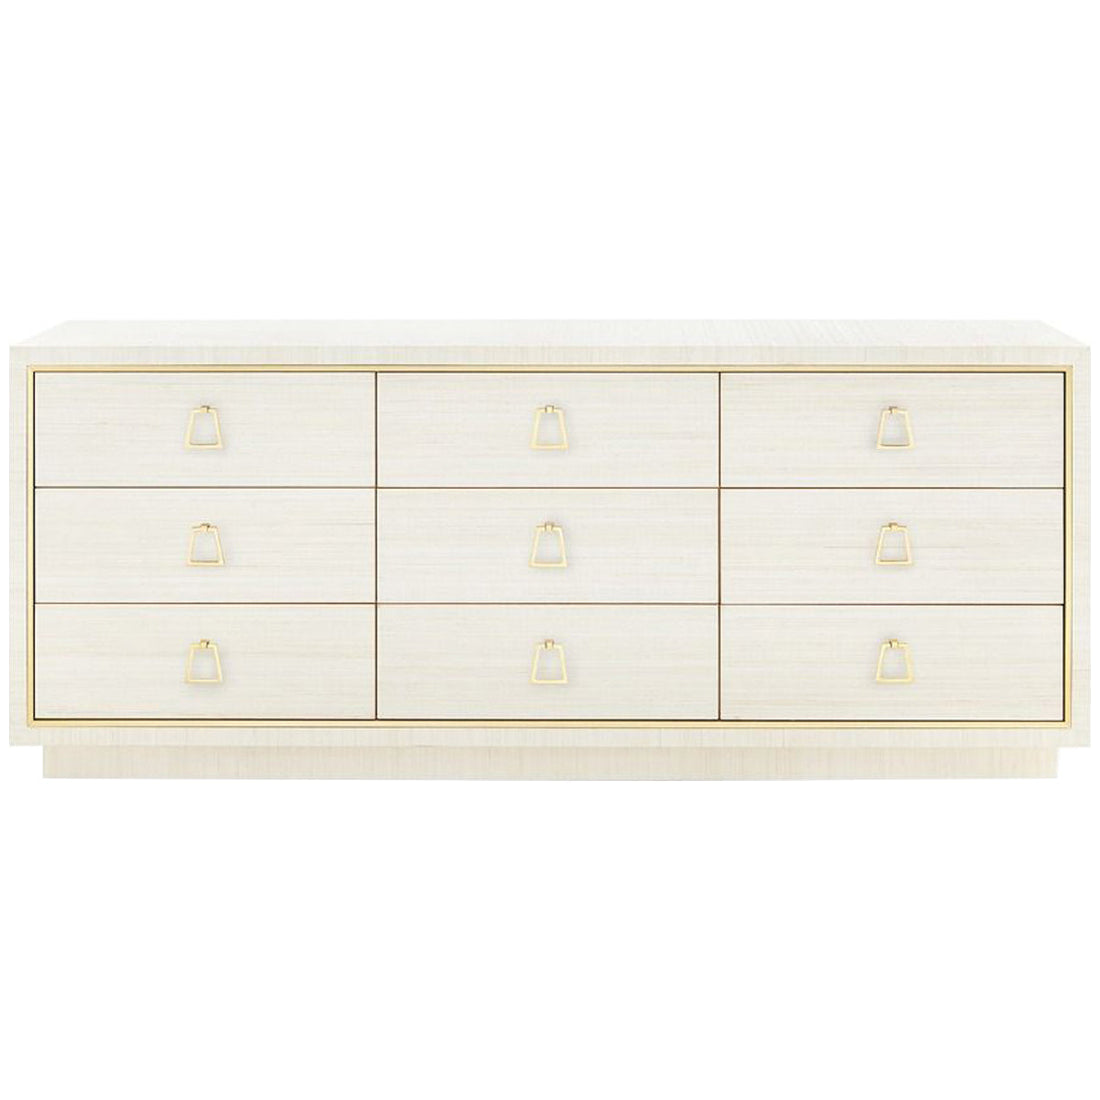 Villa & House Parker Extra Large 9-Drawer Dresser with Kelley Pull